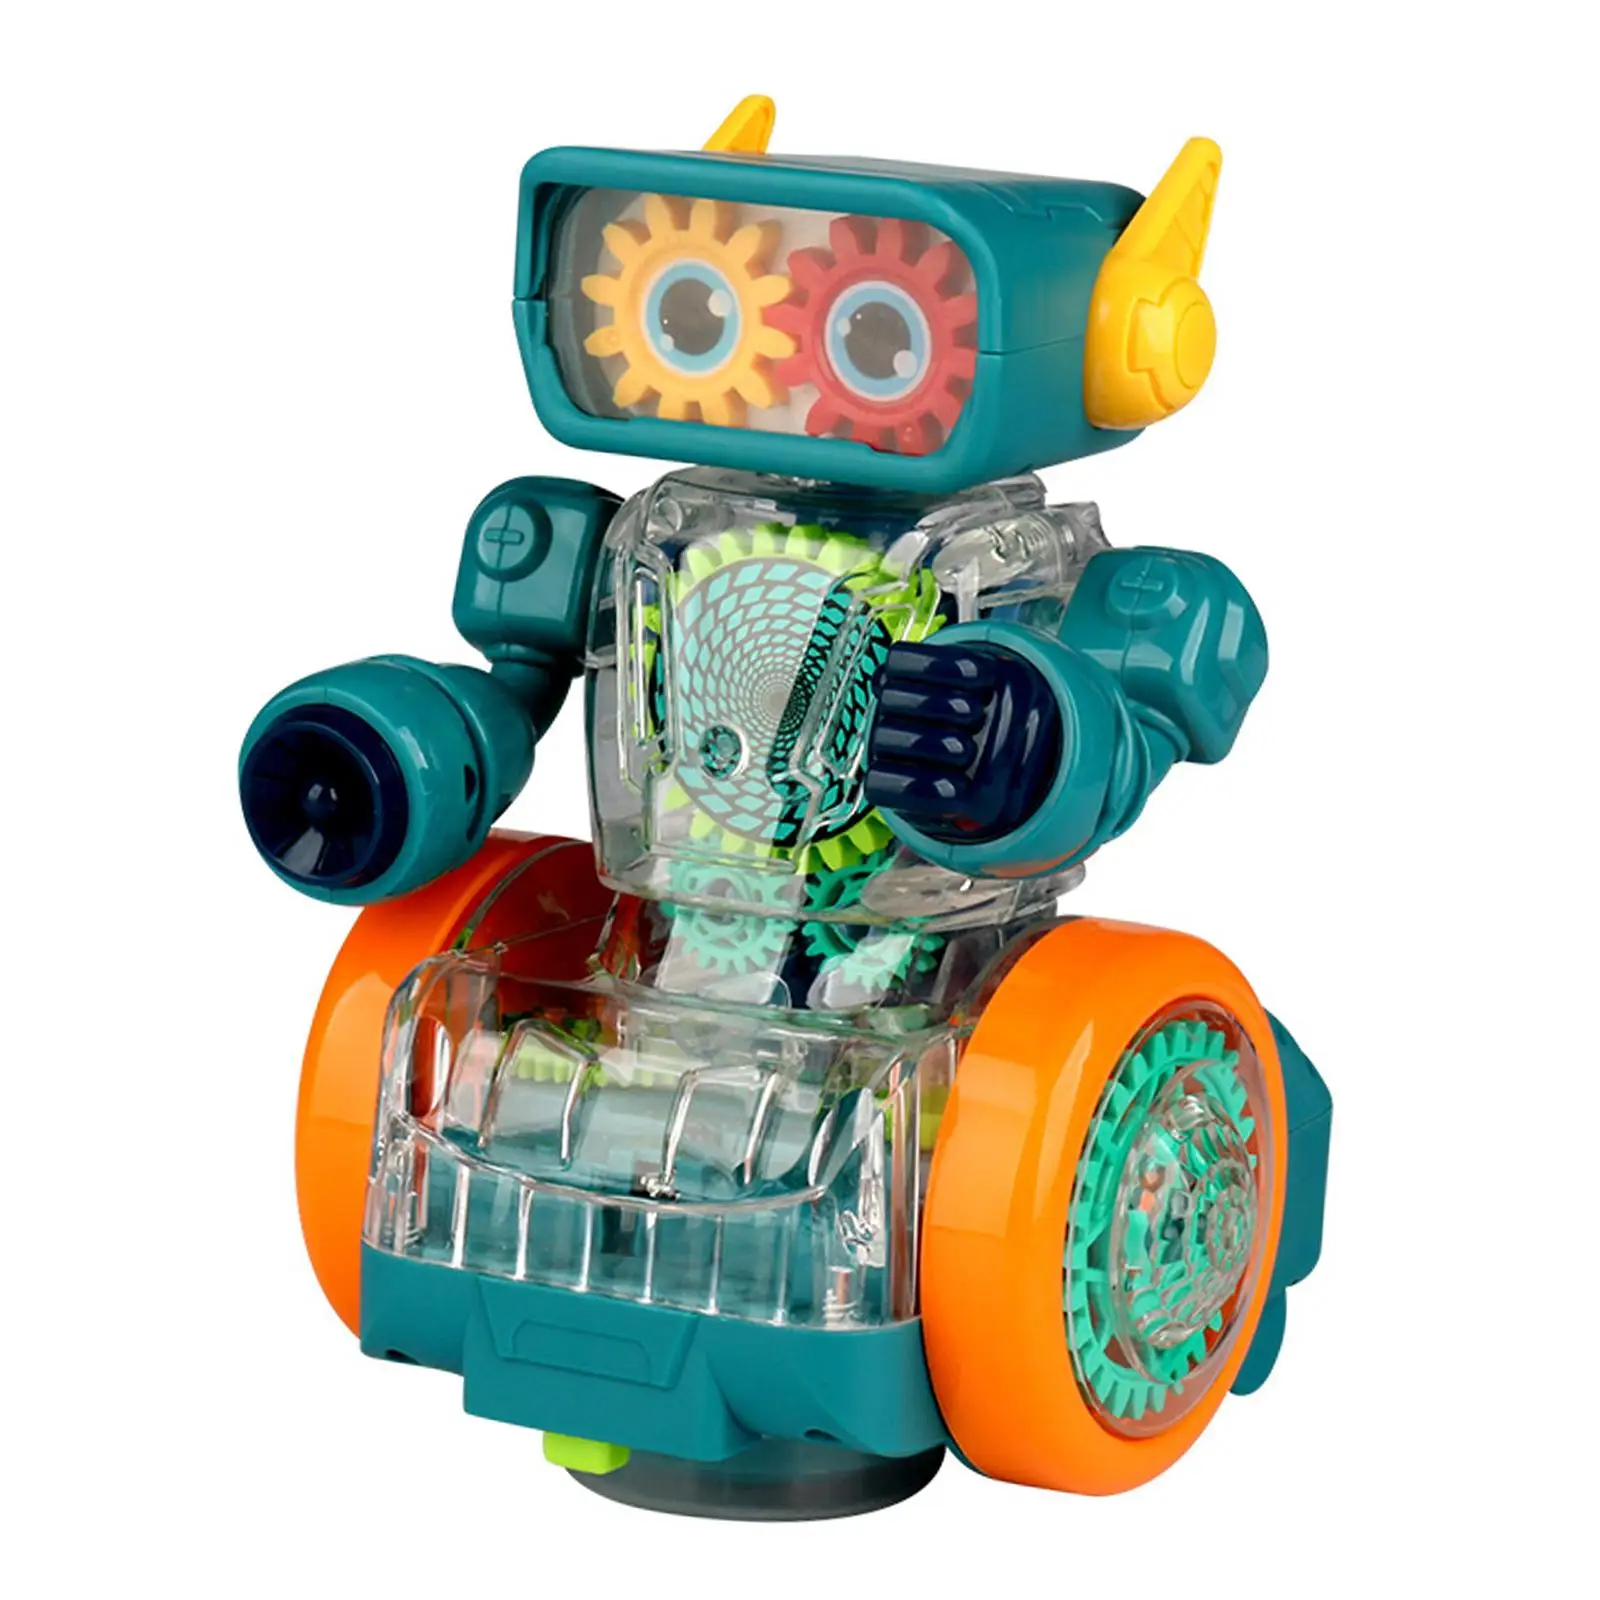 Mechanical Gear Robot Toy Interactive Toys Developmental Toys for Toddlers Birthday Gifts